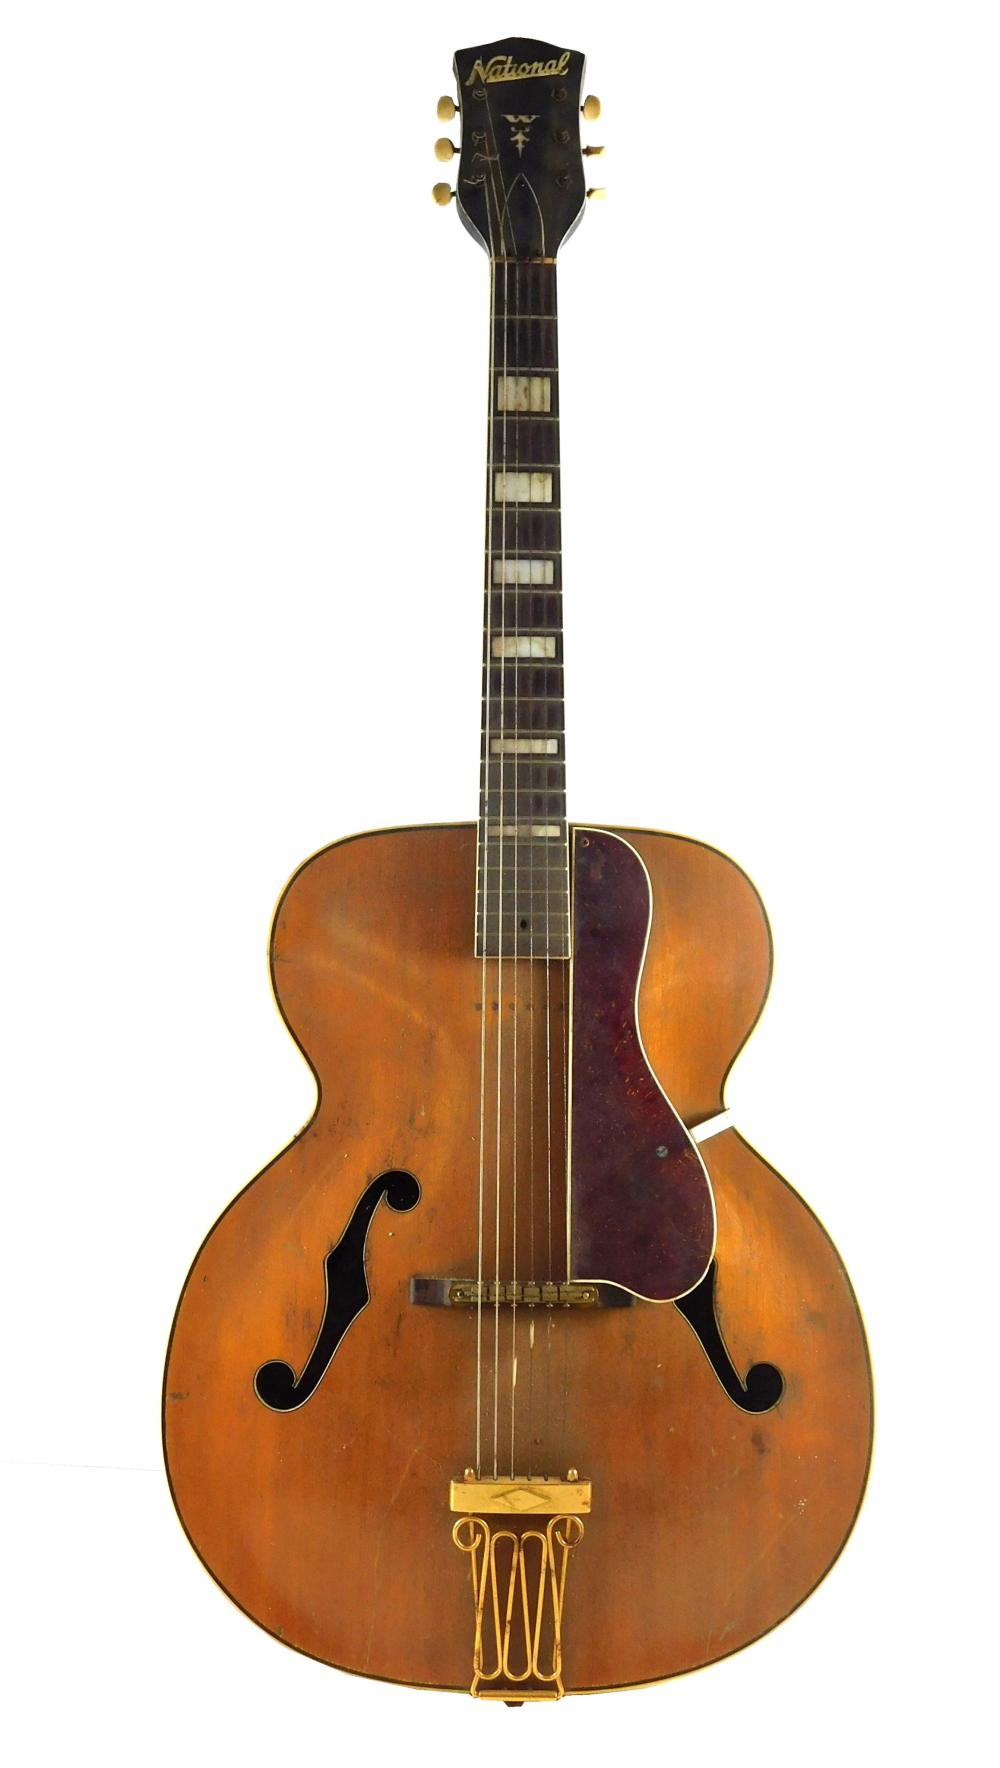 GUITAR: 1952 NATIONAL ARCHTOP (X12199),